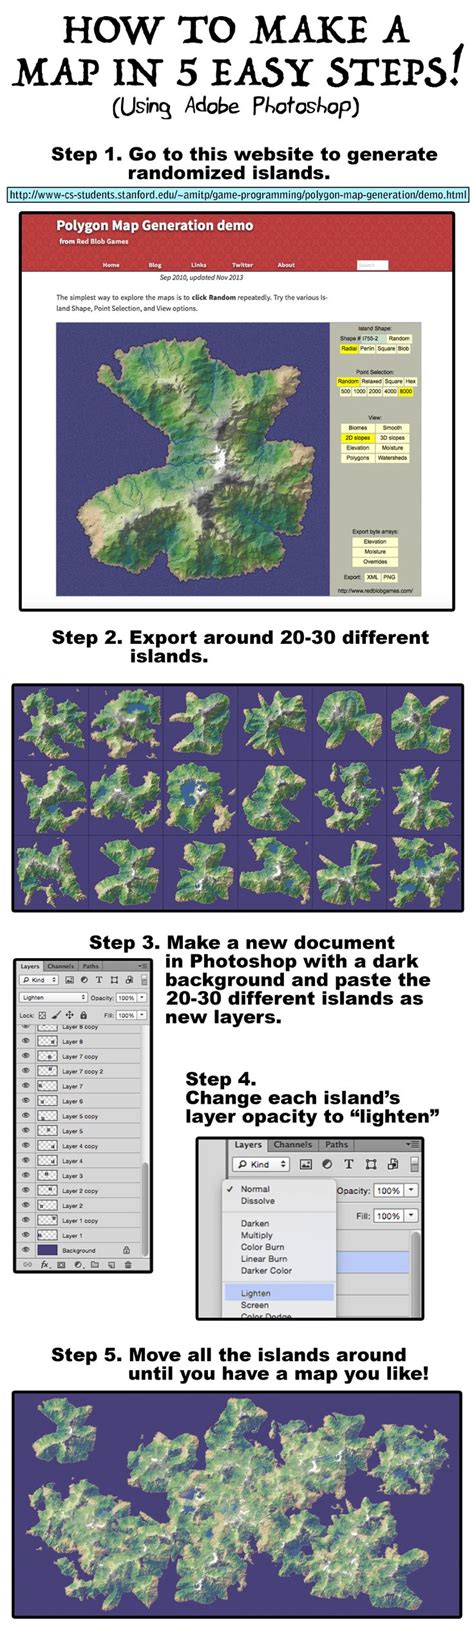 How To Make A Map In 5 Easy Steps Make A Map Easy Step Drawing Tutorial